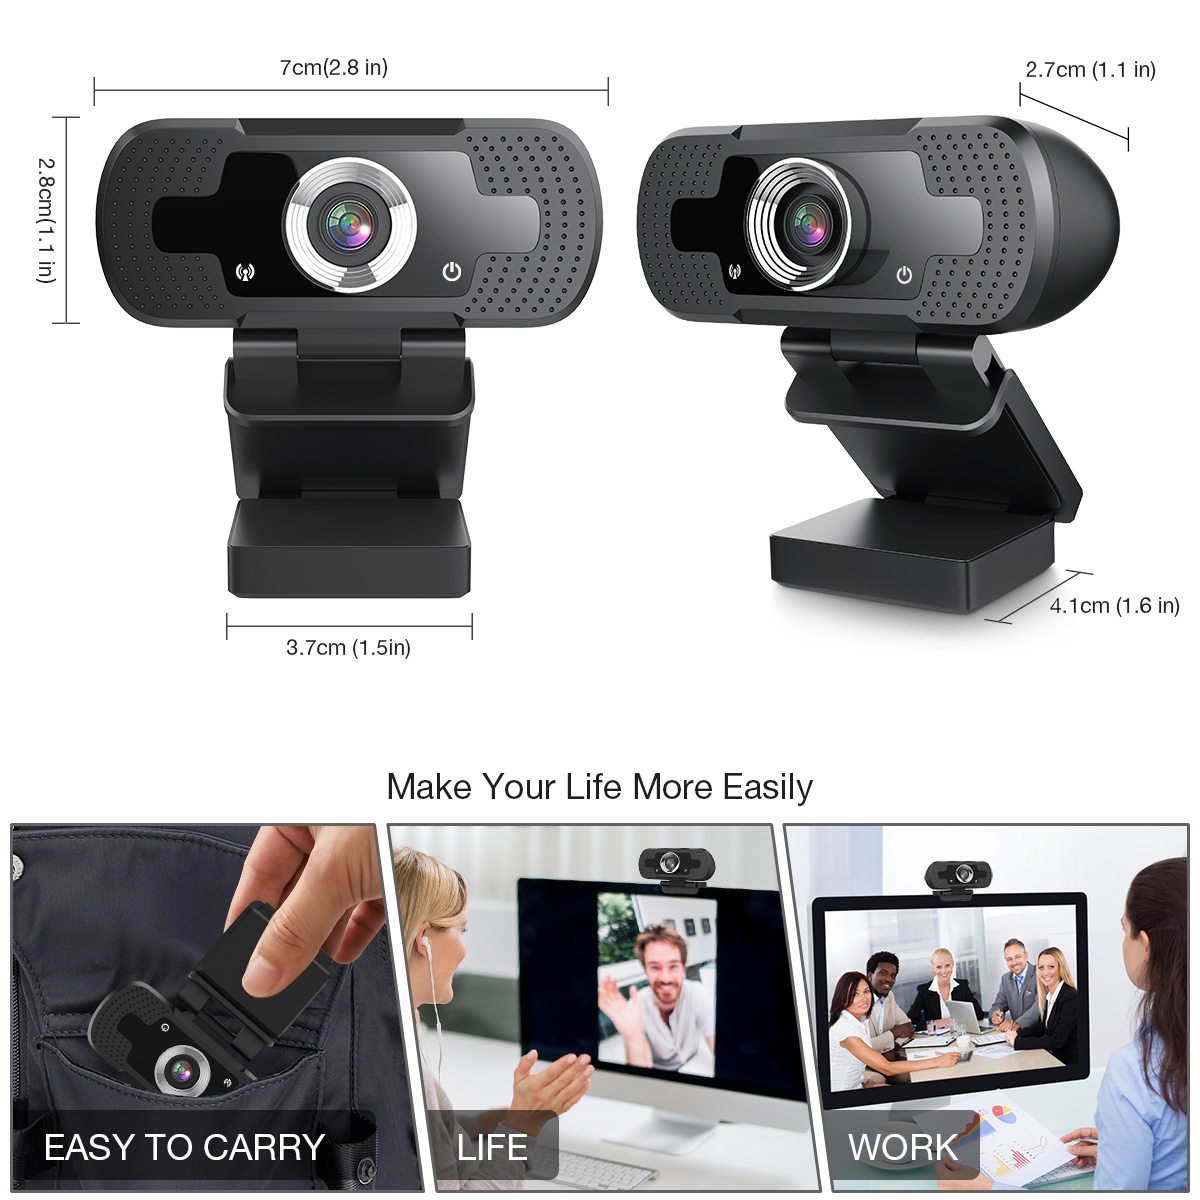 SAWAKE-1080P-HD-Webcam-Auto-Focus-30FPS-USB-Wired-Foldable-Computer-Camera-with-Built-in-Microphone-1941134-7